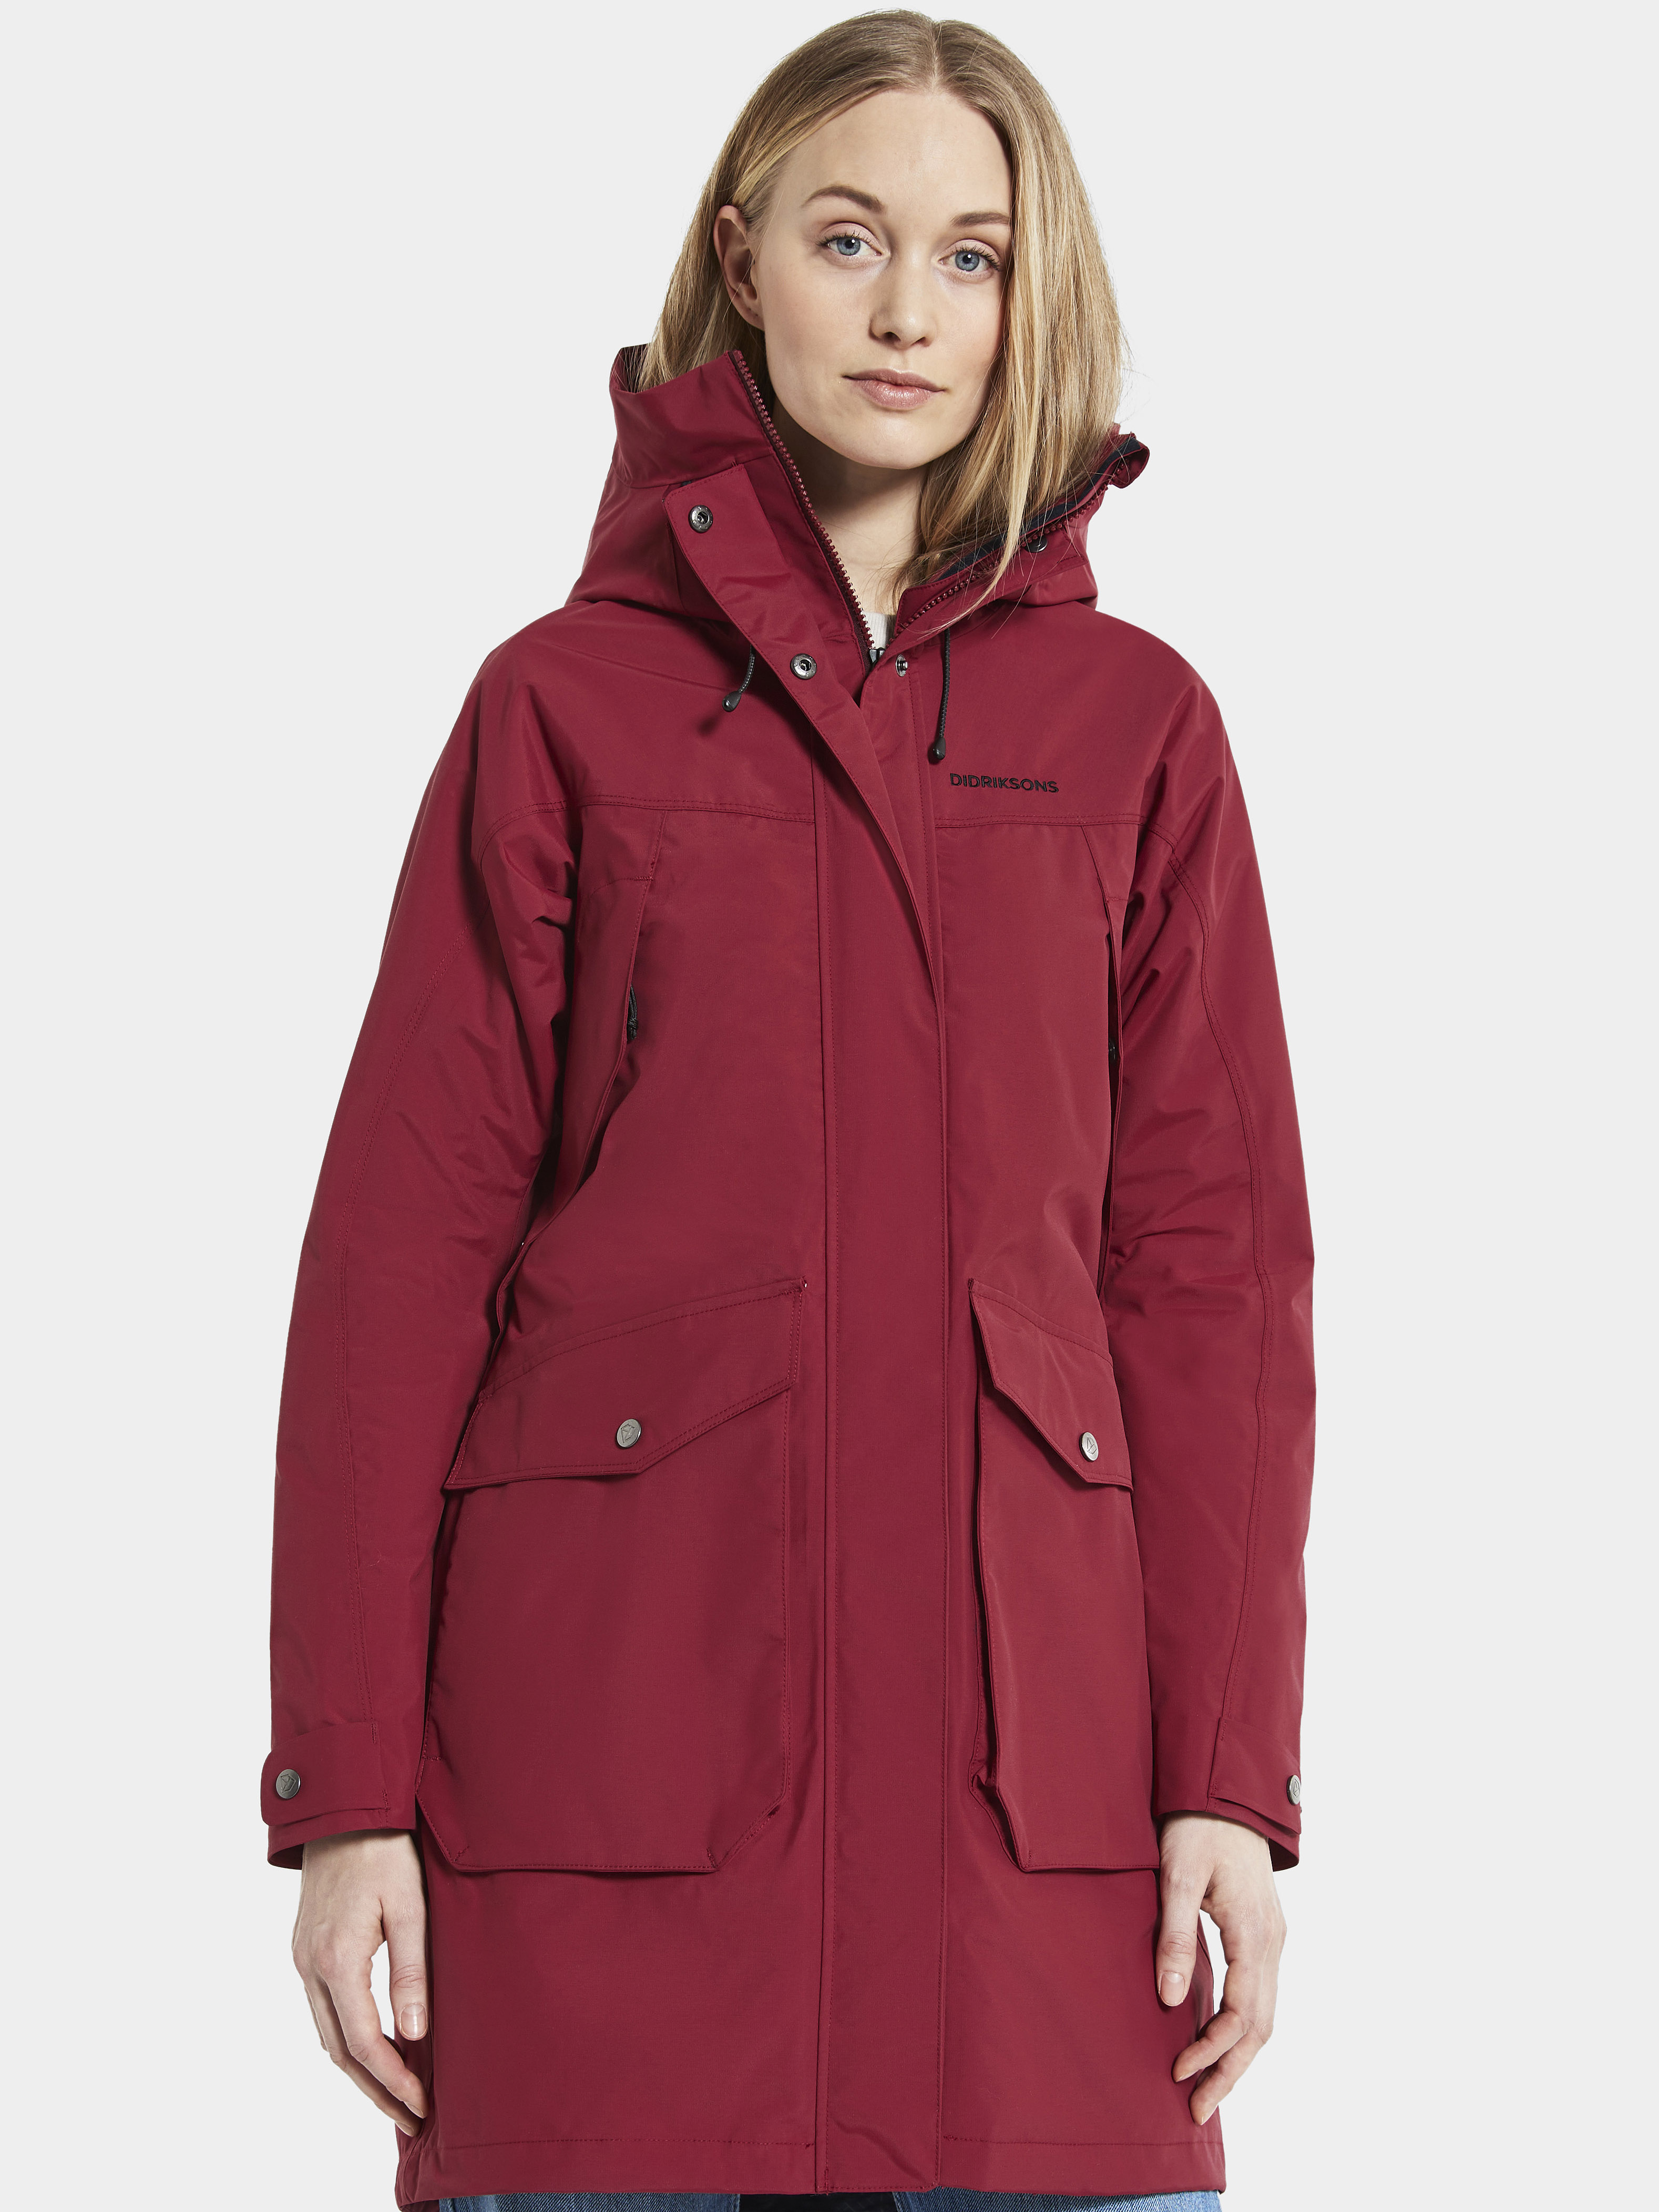 Thelma Women\'s Parka 8 Ruby Ruby Buy | Red Women\'s here Parka Outnorth | 8 Thelma Red